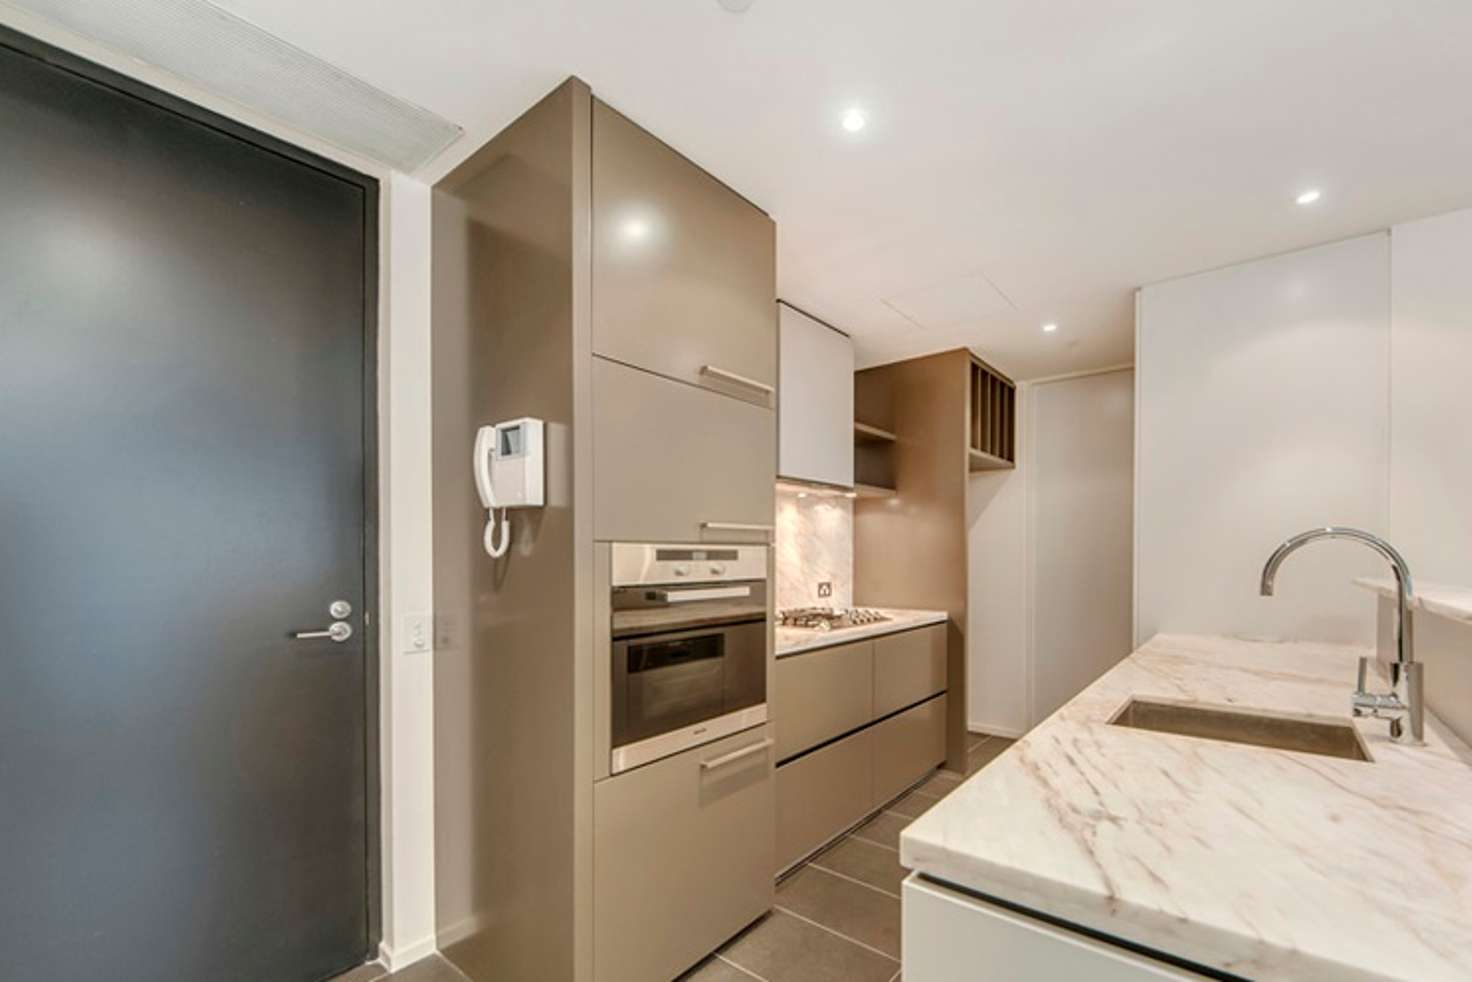 Main view of Homely apartment listing, 506/21 Marcus Clarke Street, City ACT 2601